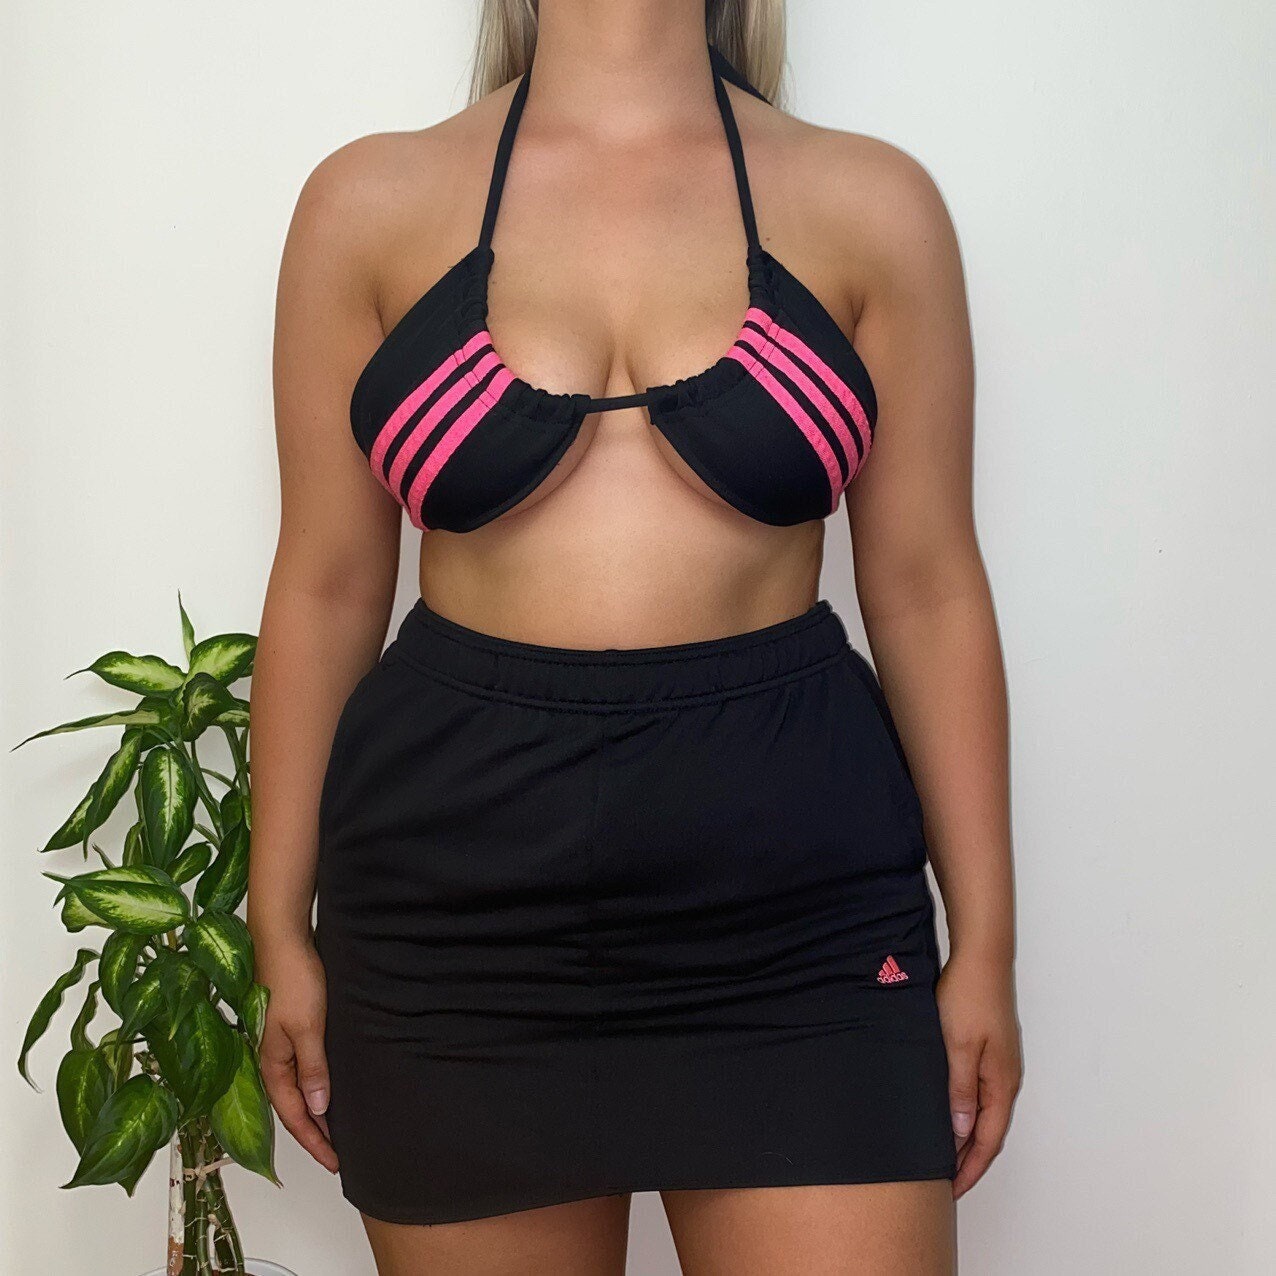 model wearing adidas bikini crop top with hot pink 3 stripe detail and matching black skirt with small pink adidas logo